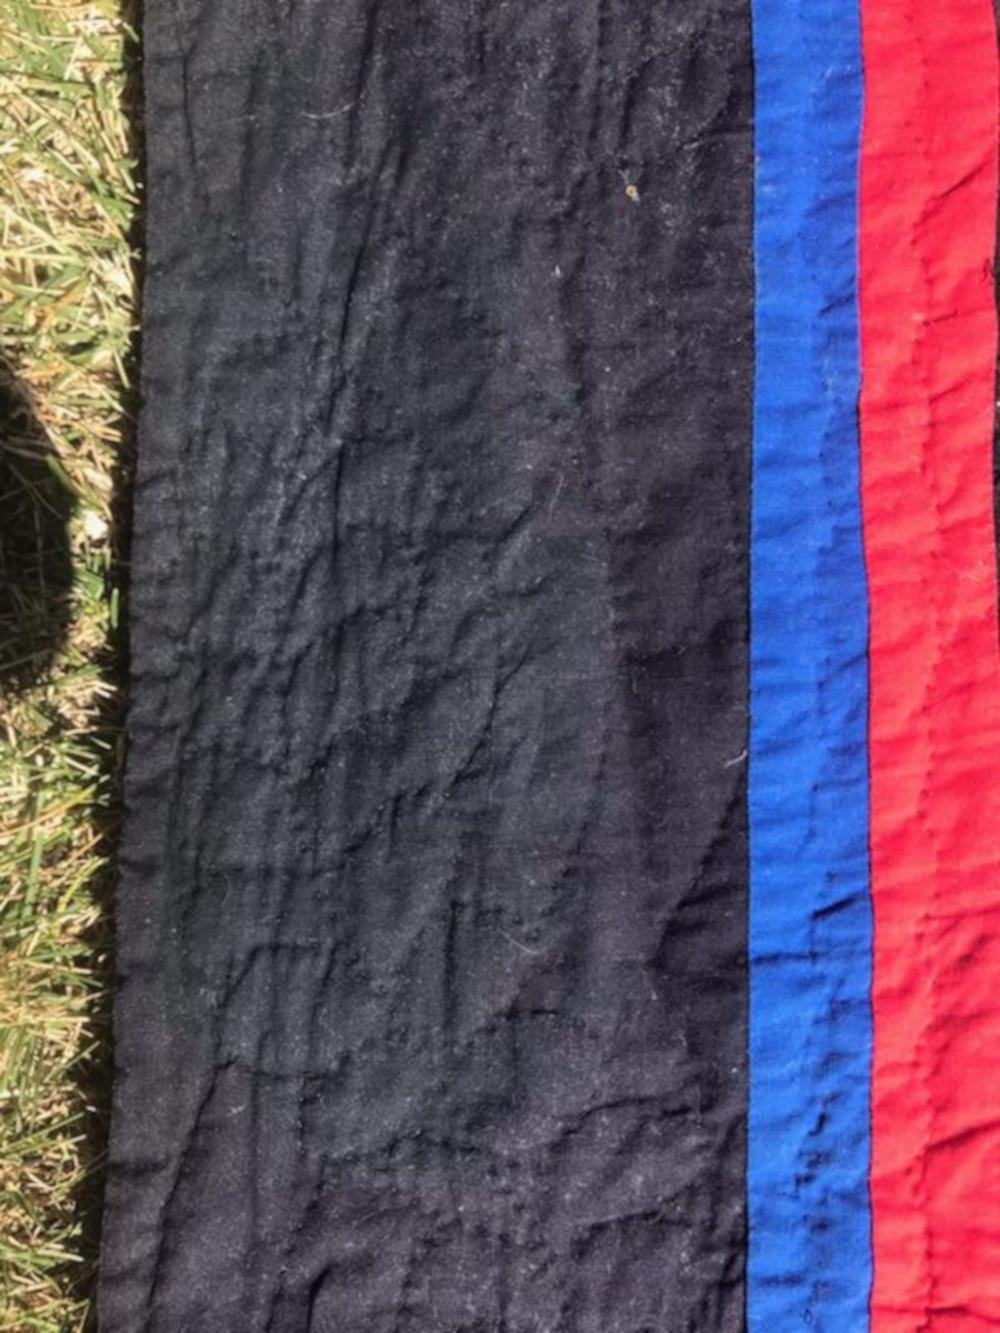 This finely pieced Holmes county Ohio Amish mini - pieced ocean waves quilt is in fine condition. It has a double inner border in red and blue and on a black back round fabric. The quilting is very good and tight. Gem tone colors on a black ground.